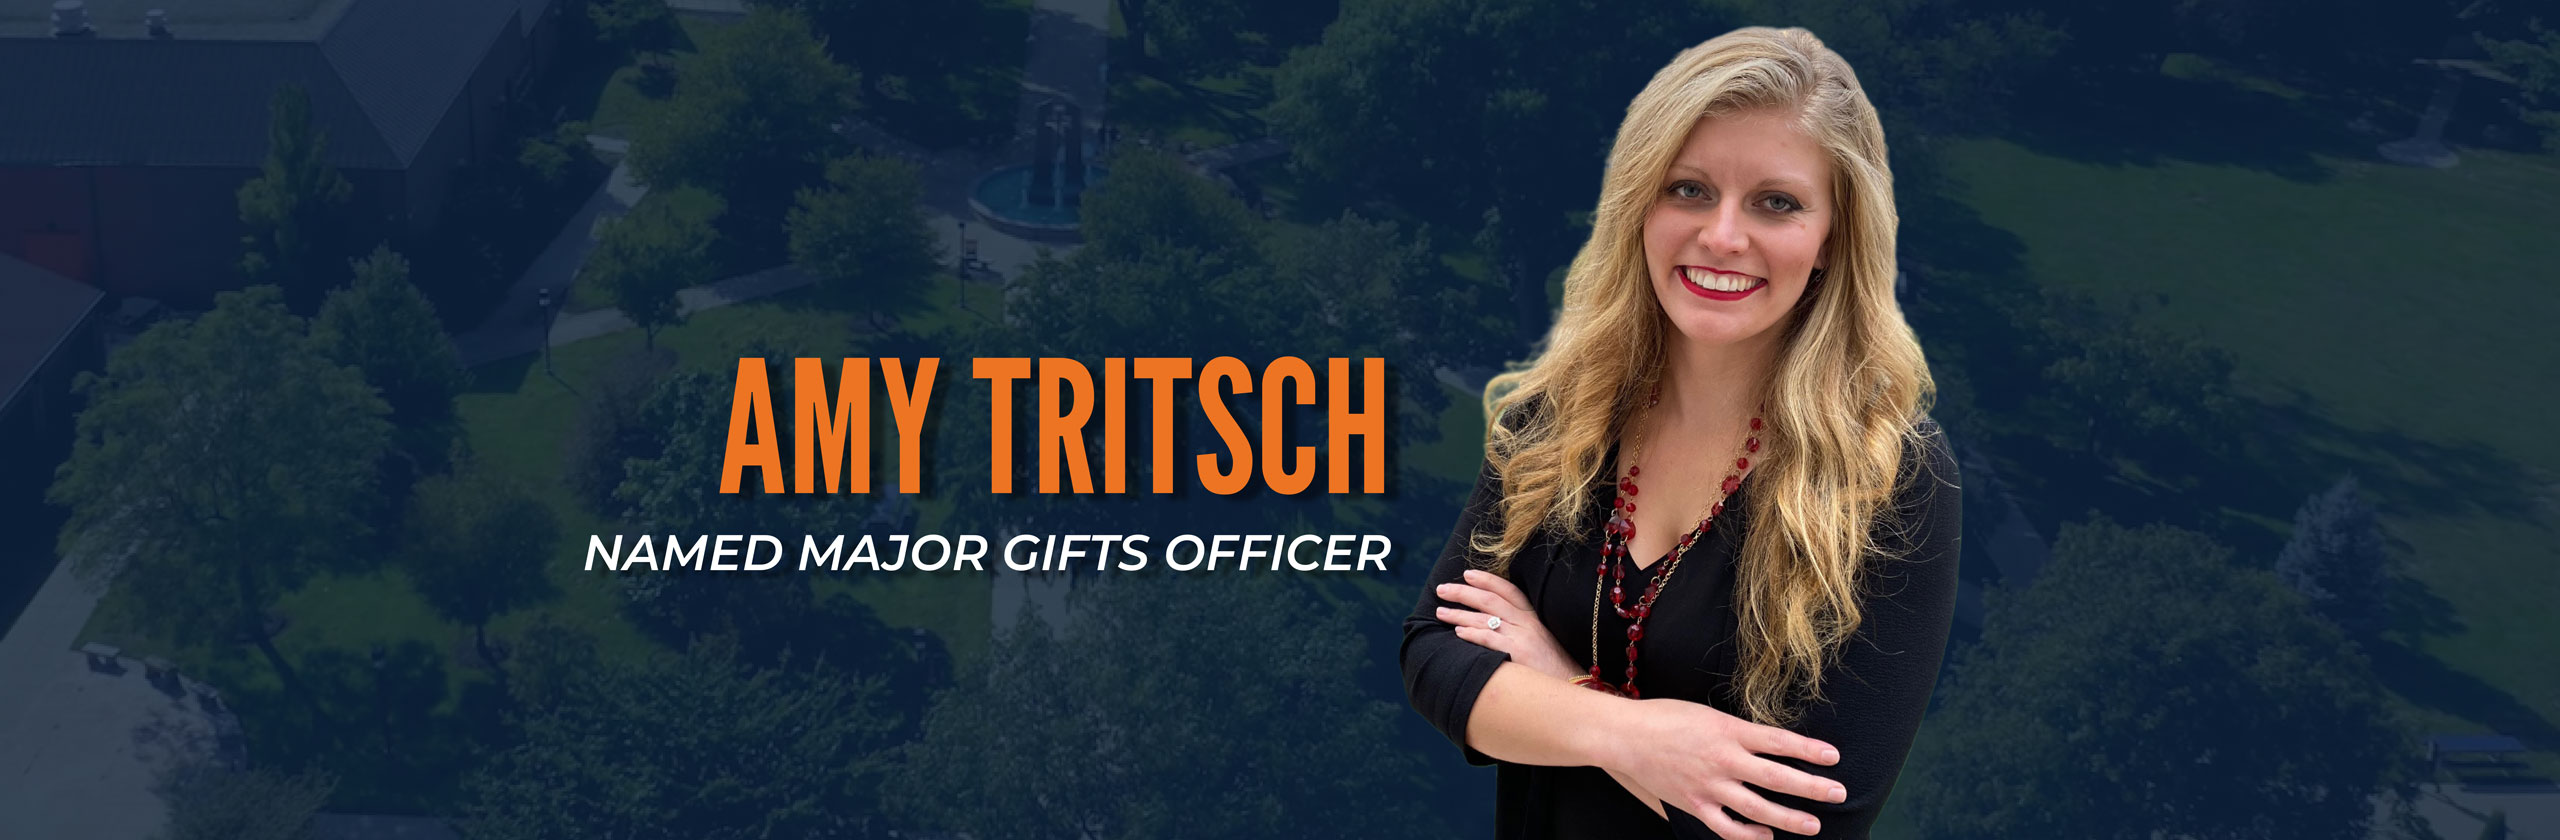 Amy Tritsch Named Major Gifts Officer at Midland University 